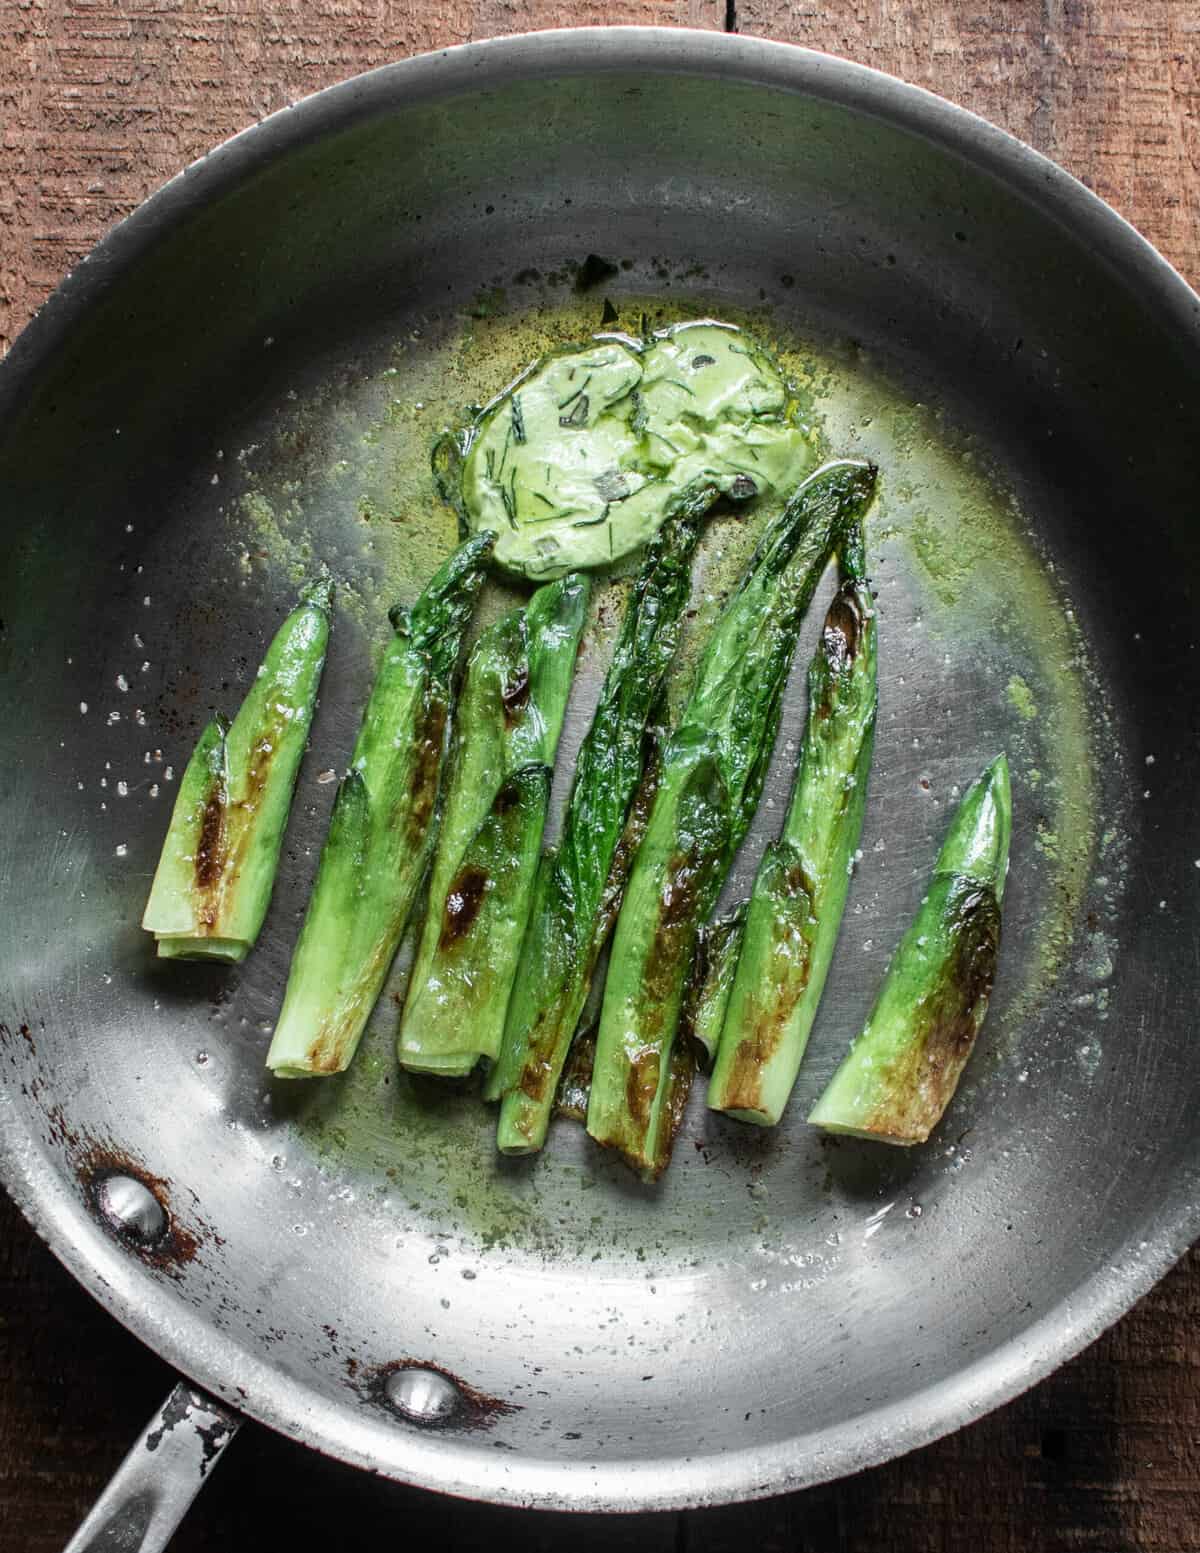 Cooked hosta shoots with ramp butter 